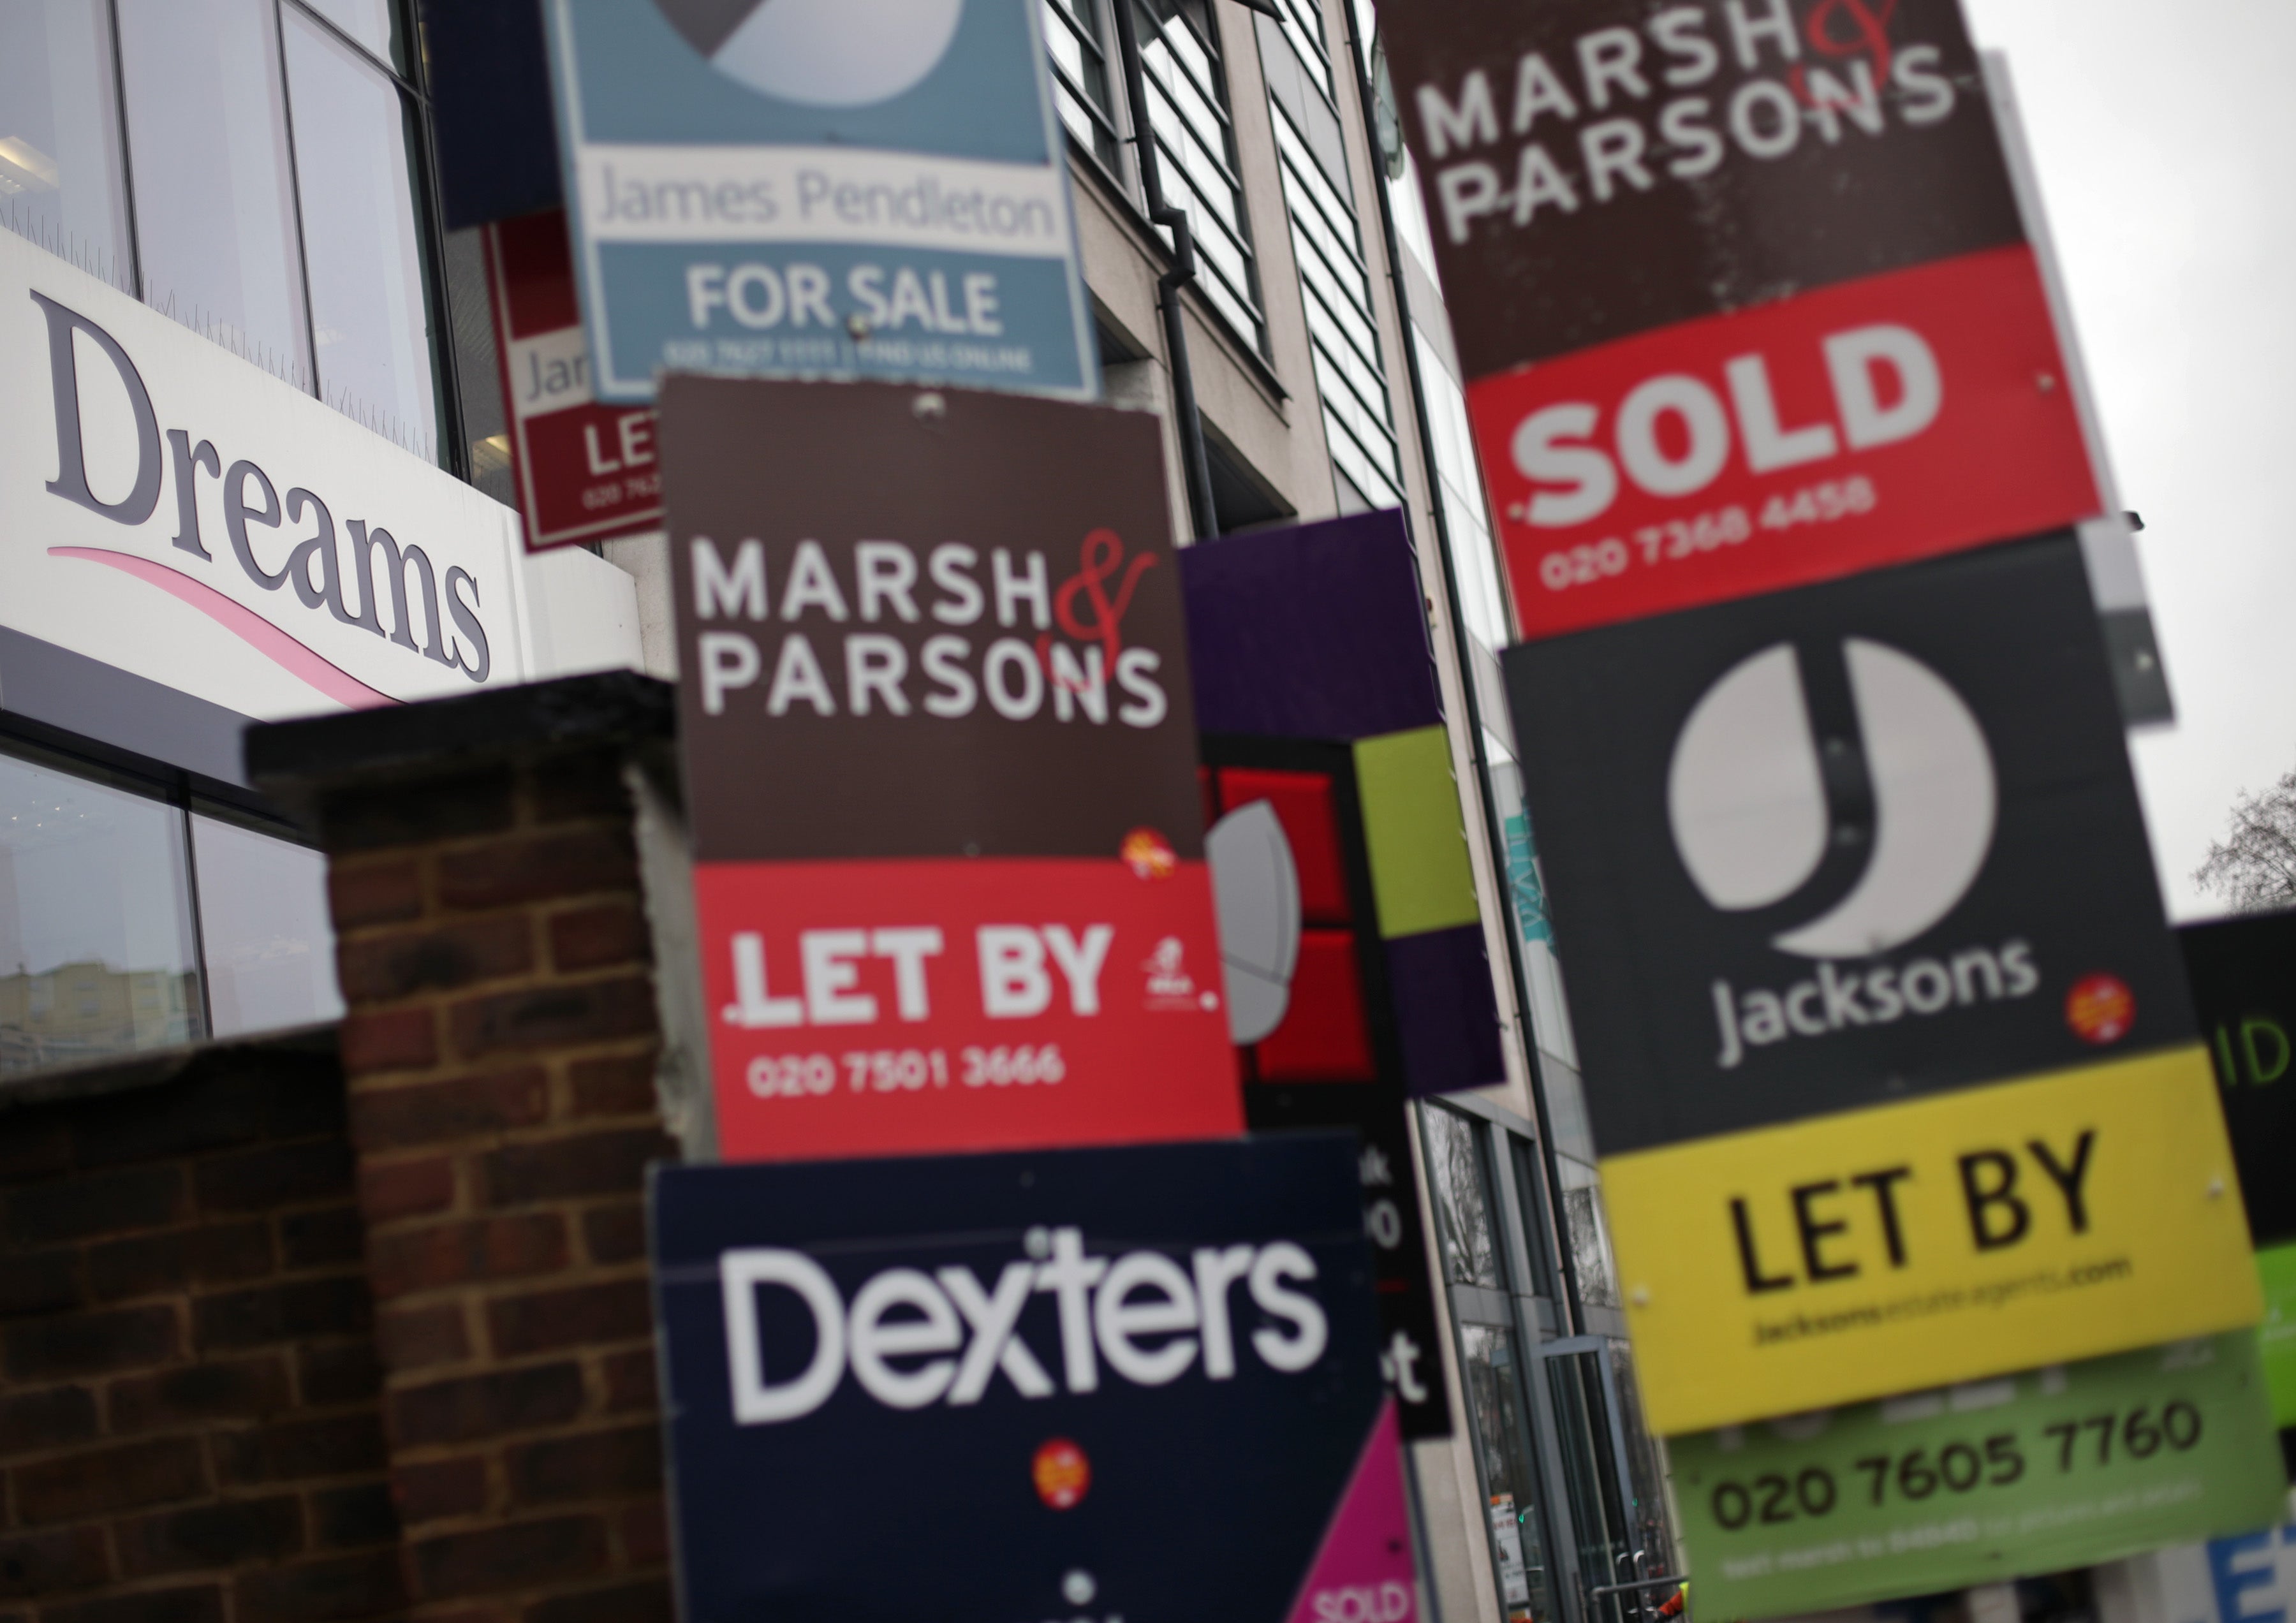 The average house price has hit a record high of £270,000 after surging by £28,000 over the past year, according to the Office for National Statistics (Yui Mok/PA)